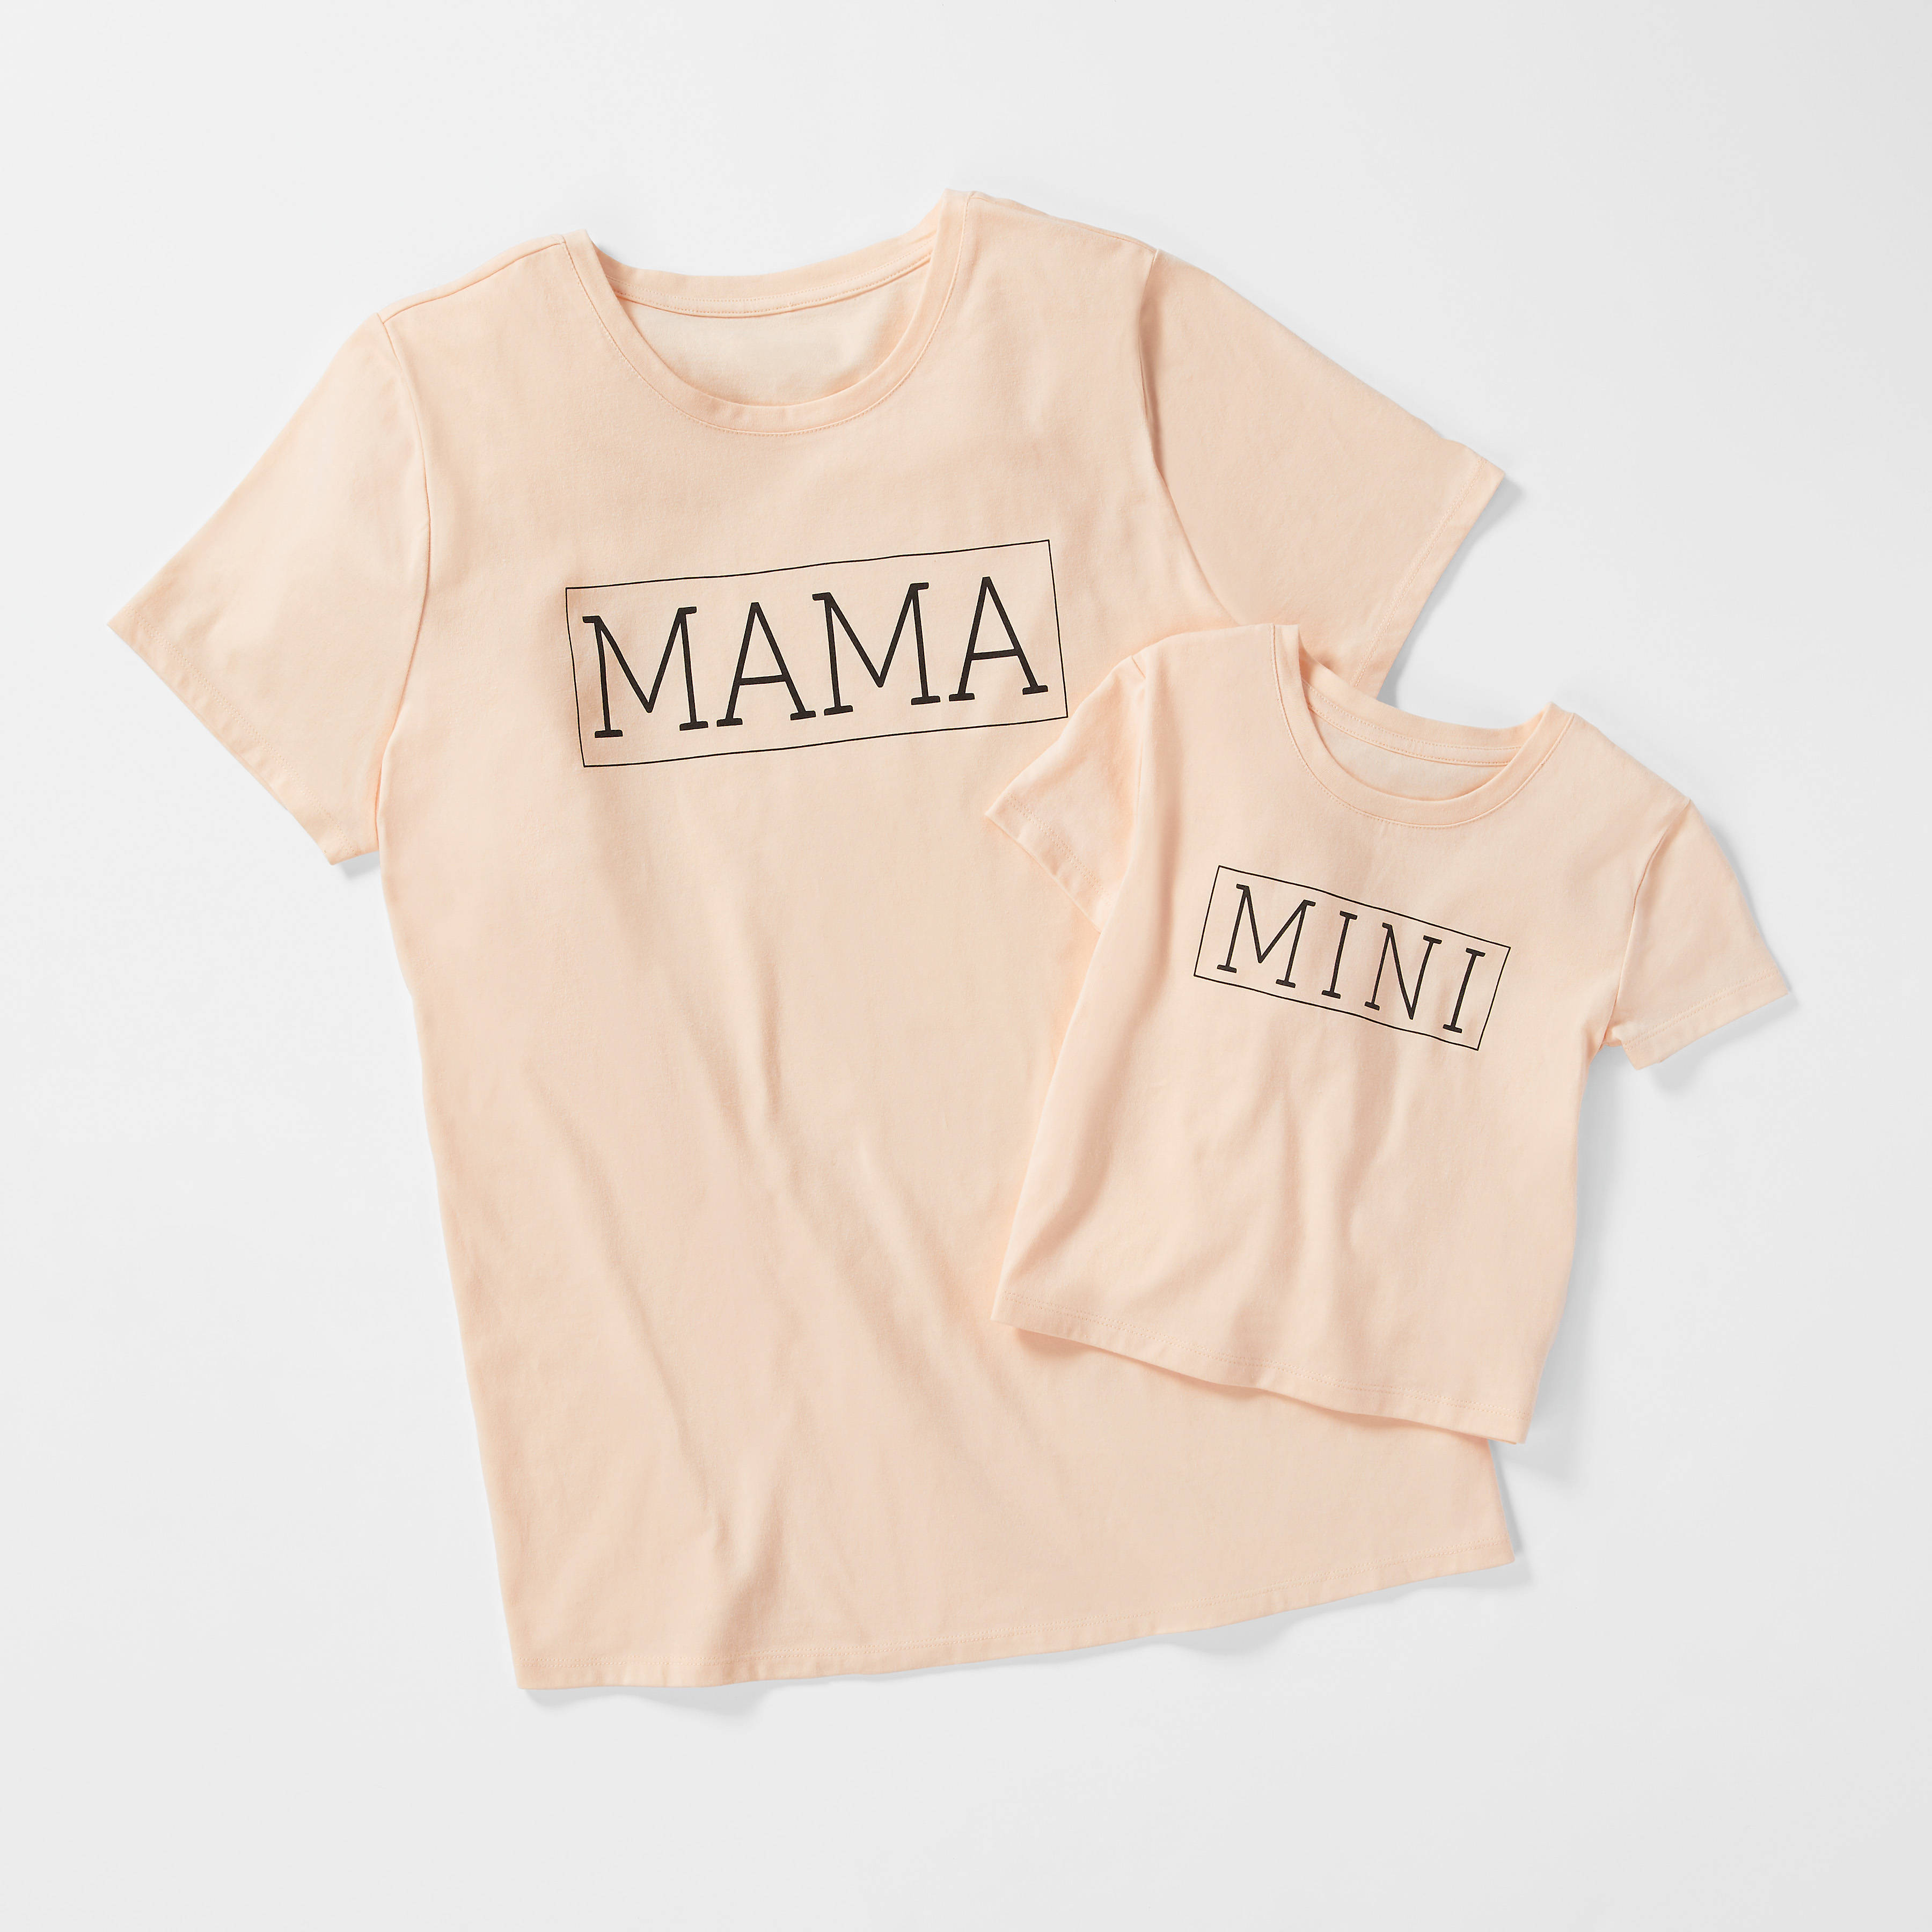 SS Crew Neck Graphic: Sans Serif Mama 1121170:Sunset Pink Pearl 40-0005-11:10/12 Product Image 2